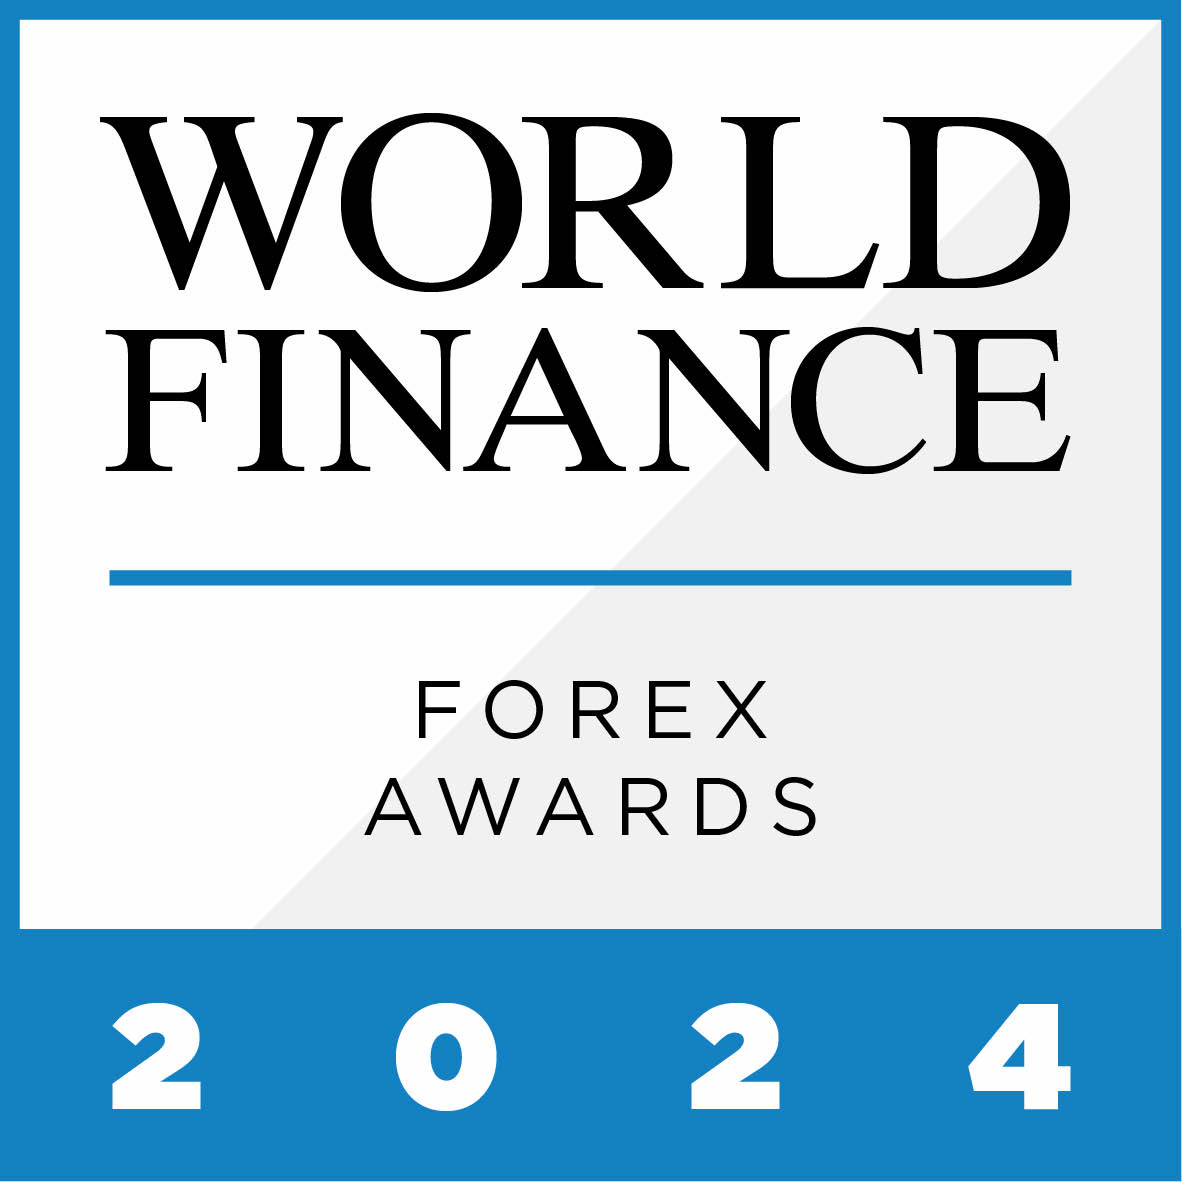 With global economic uncertainty persisting in 2024, it has been a challenging year in the Forex industry. World Finance presents its awards for those who have led the way during a year characterised by sluggish growth